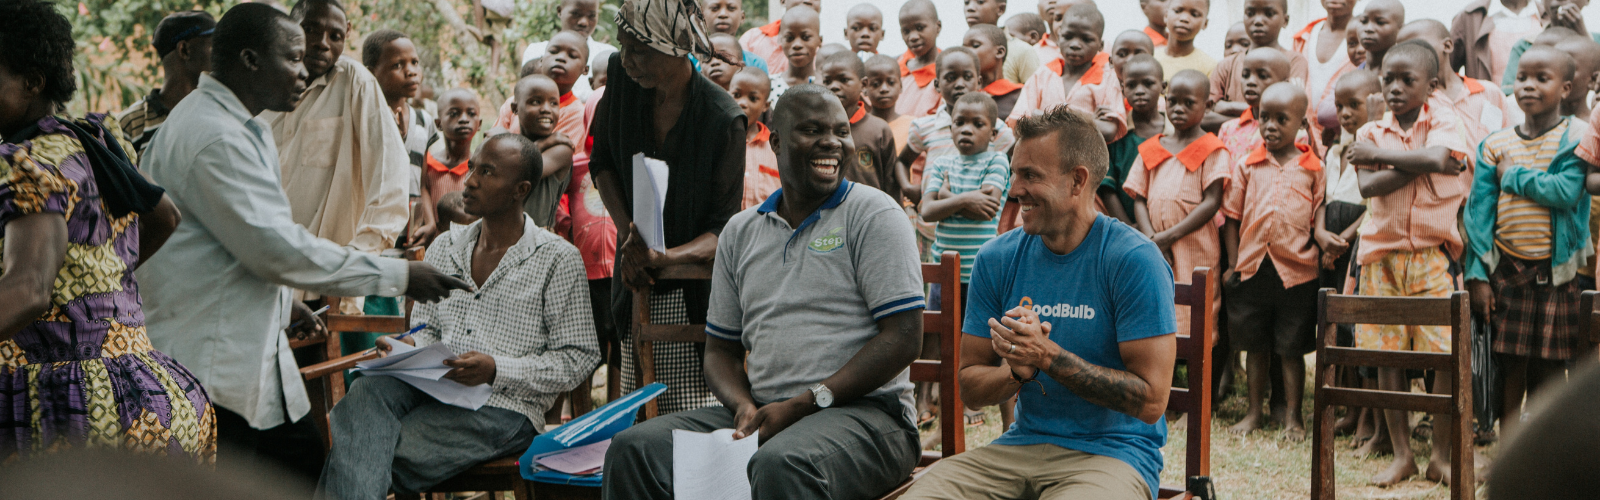 tom meeting with a village in uganda